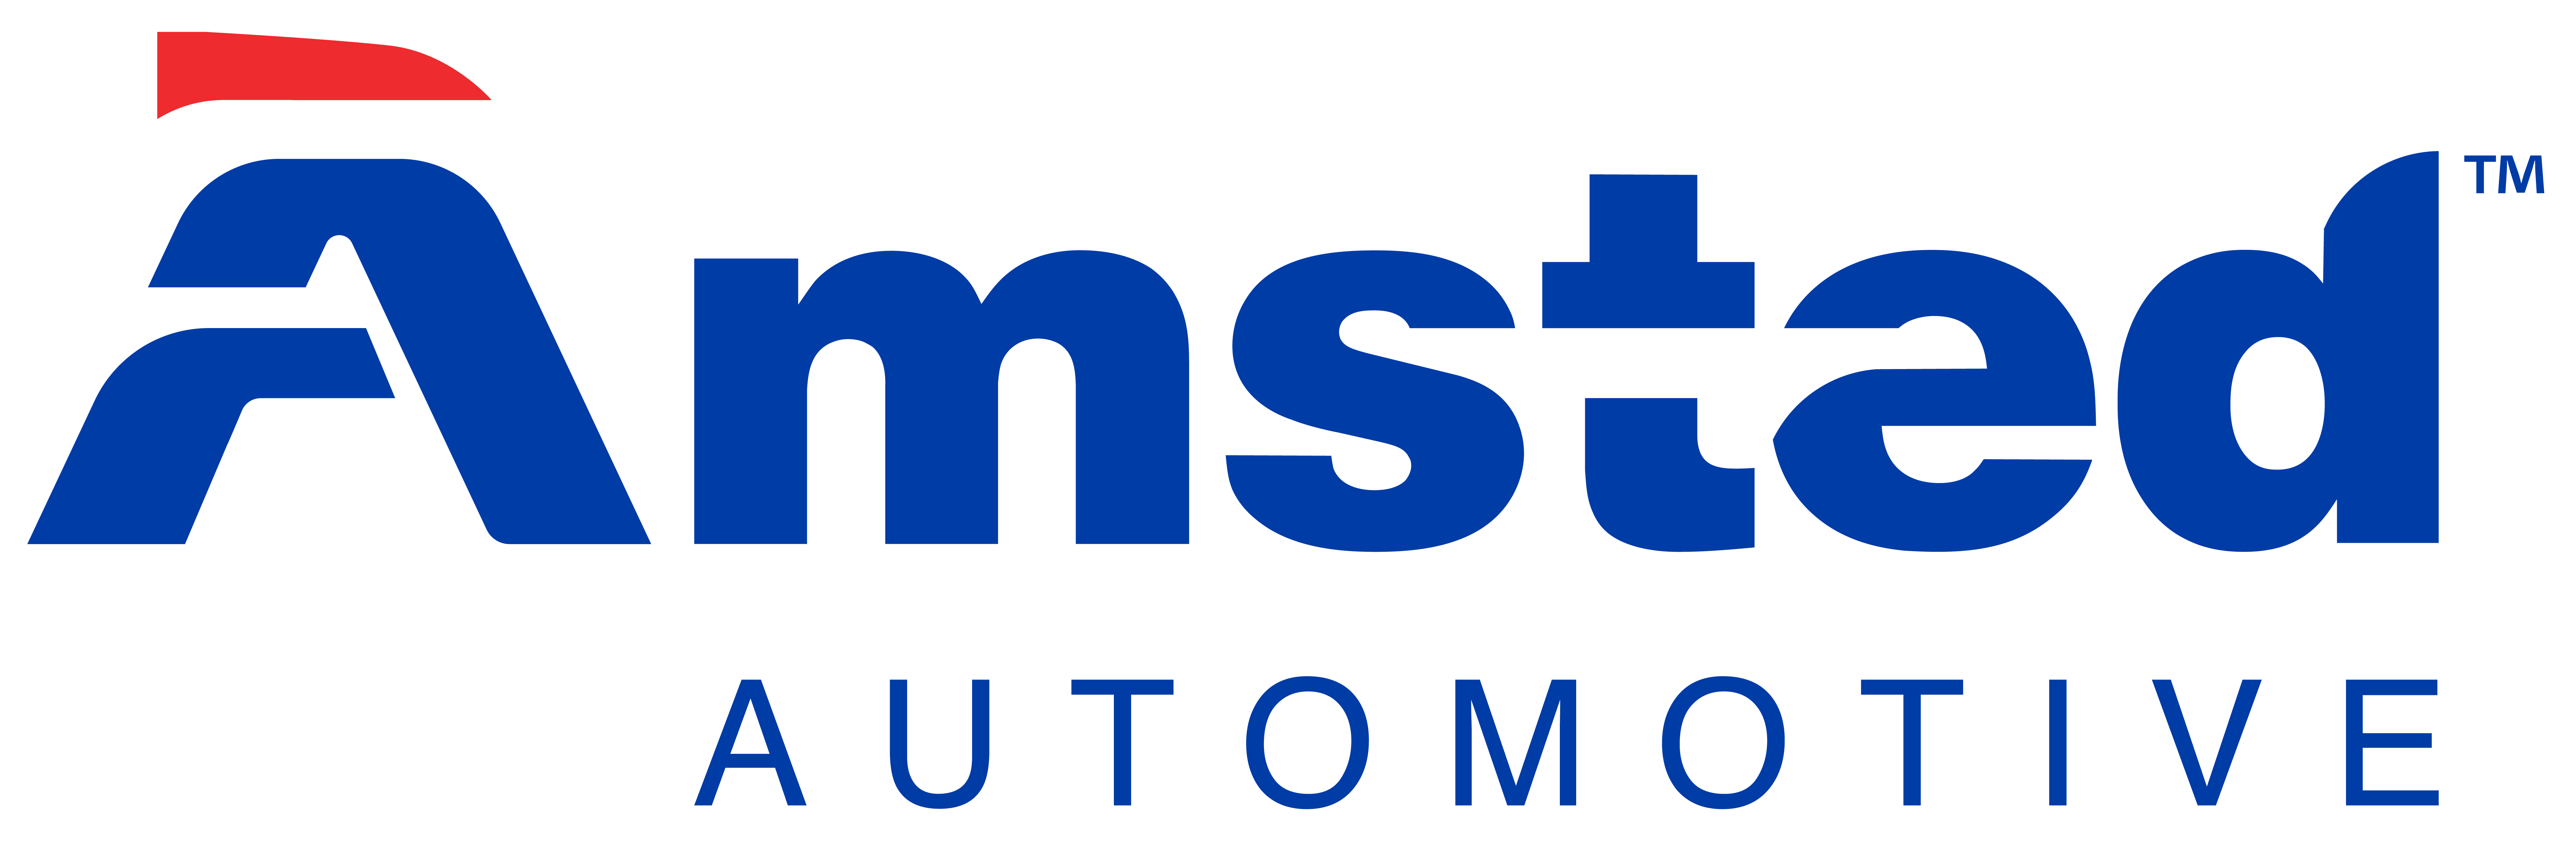 Amsted Automotive Expands Global Powder Metallurgy Capacity  by Forming a Joint Venture with Anhui HOFO Mechanical and Electrical Co. Ltd.